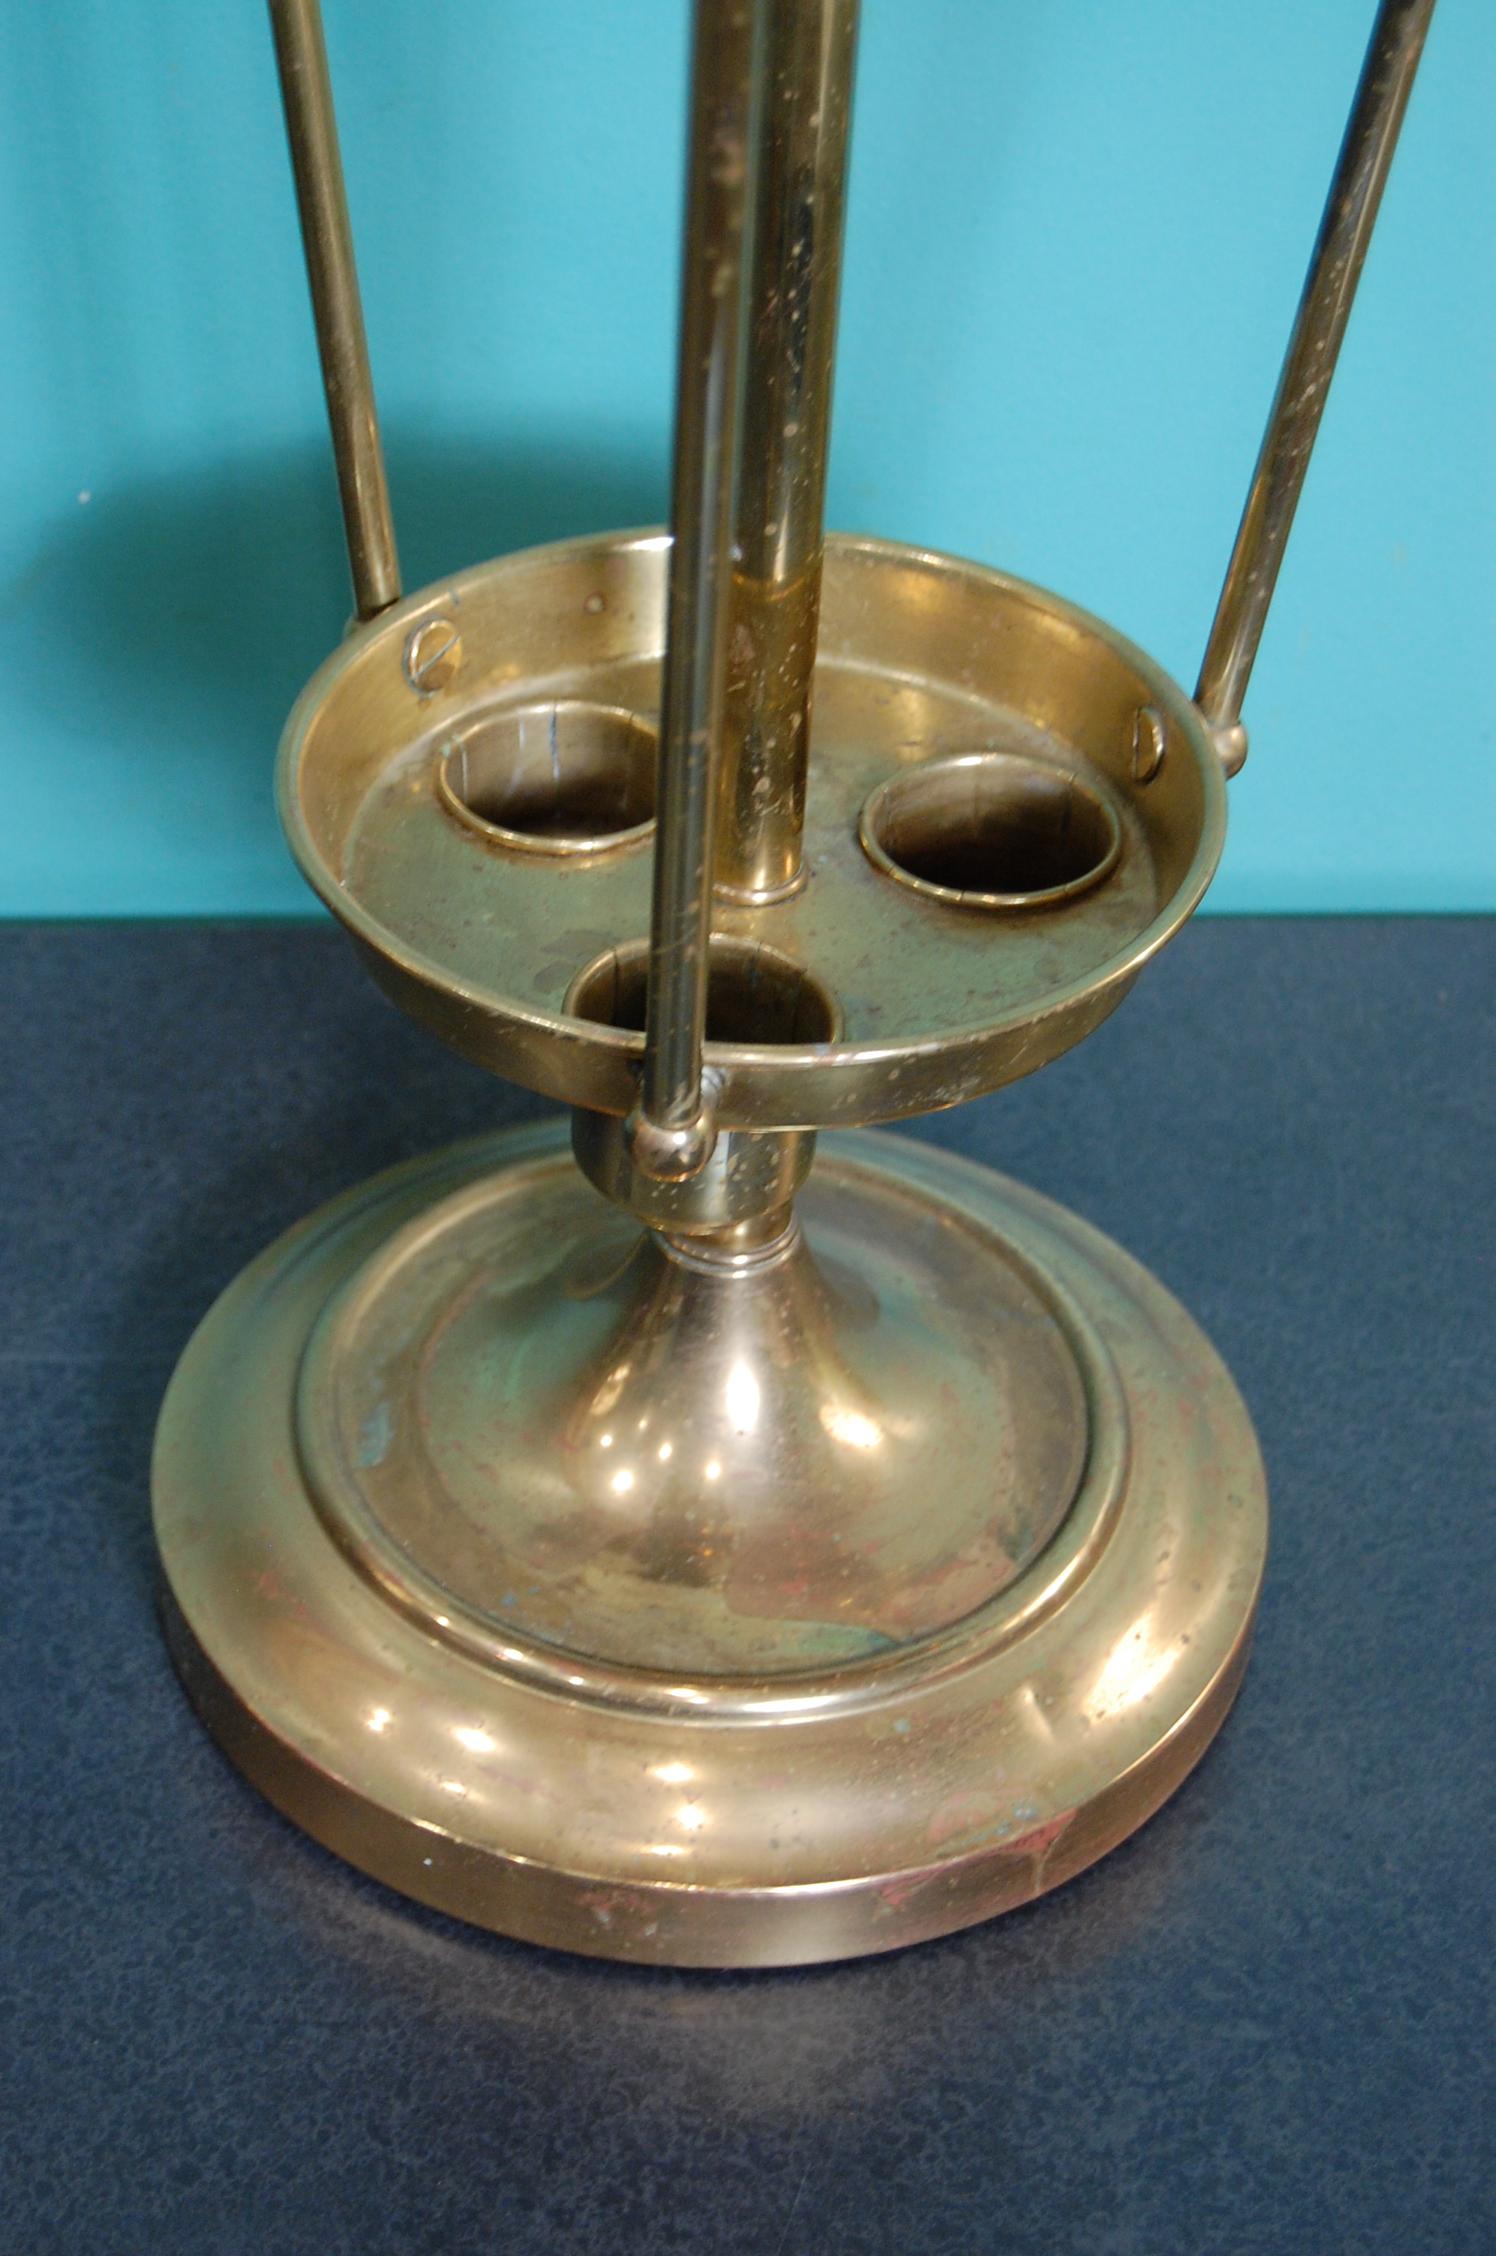 Mid-20th Century Brass Umbrella Stand by Herco Art Manufacturing Company For Sale 1